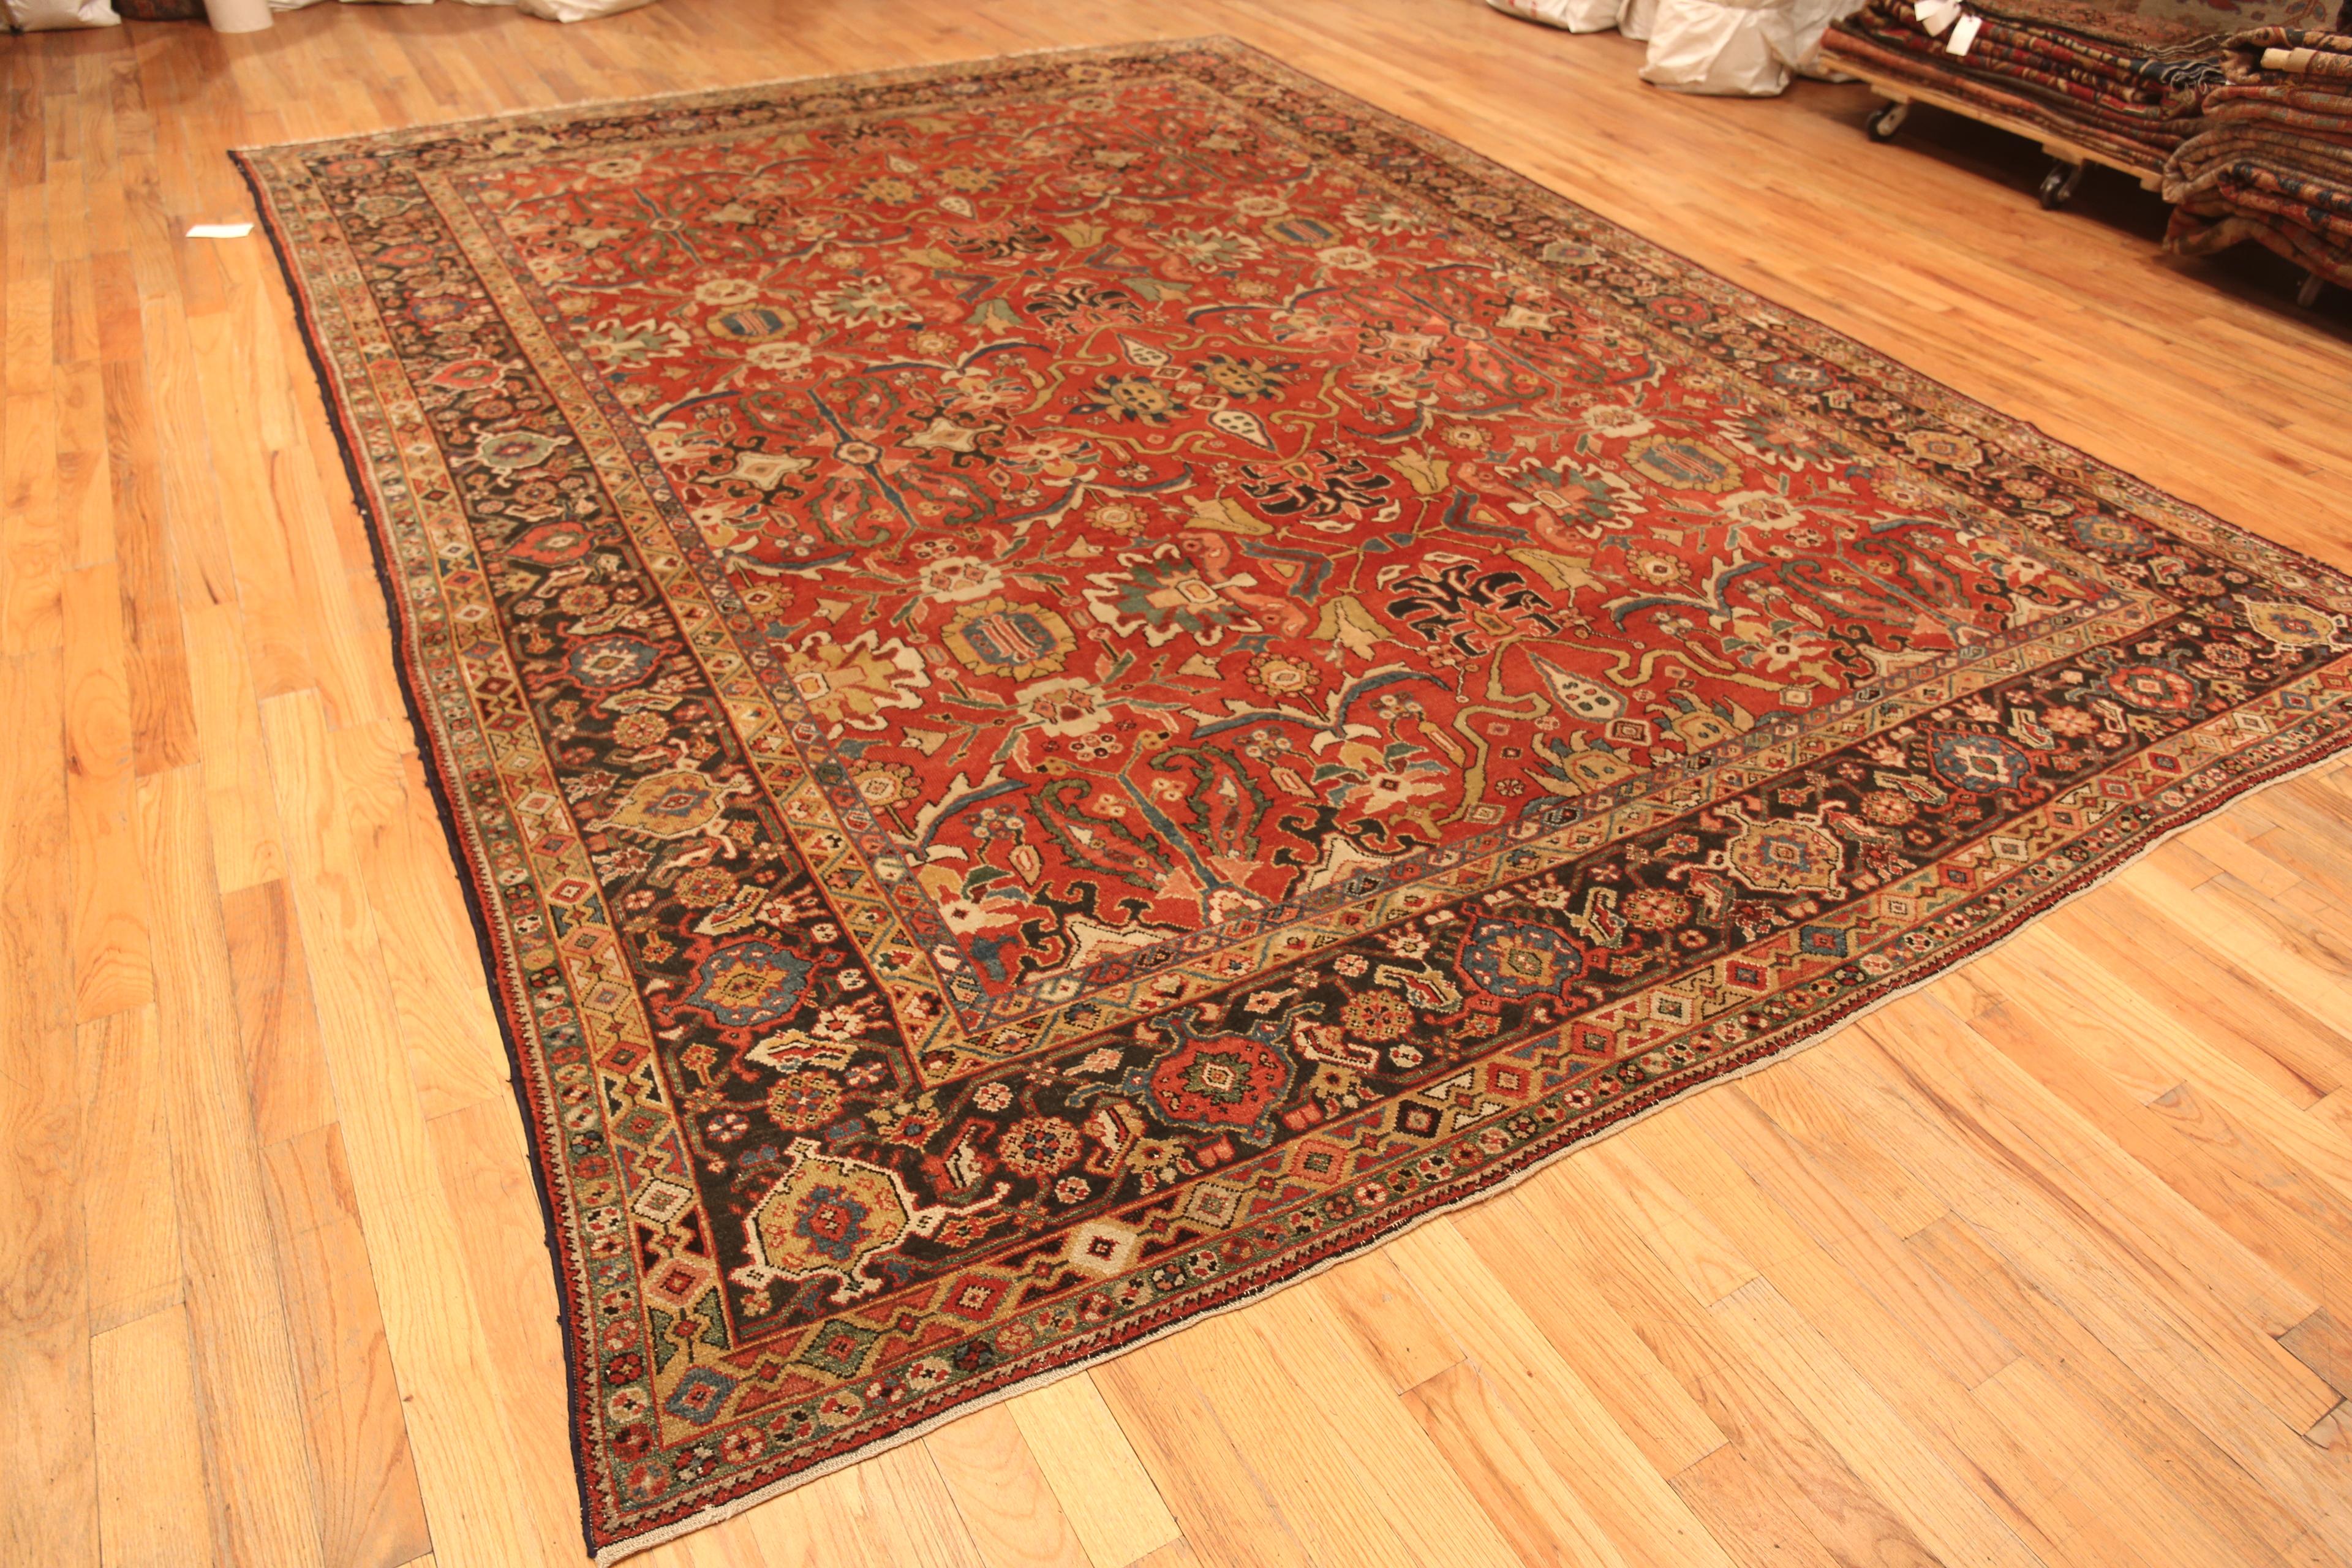 Red Antique Persian Sultanabad Rug, Country of Origin: Persian rugs, Circa date: 1900. Size: 10 ft x 14 ft (3.05 m x 4.27 m)